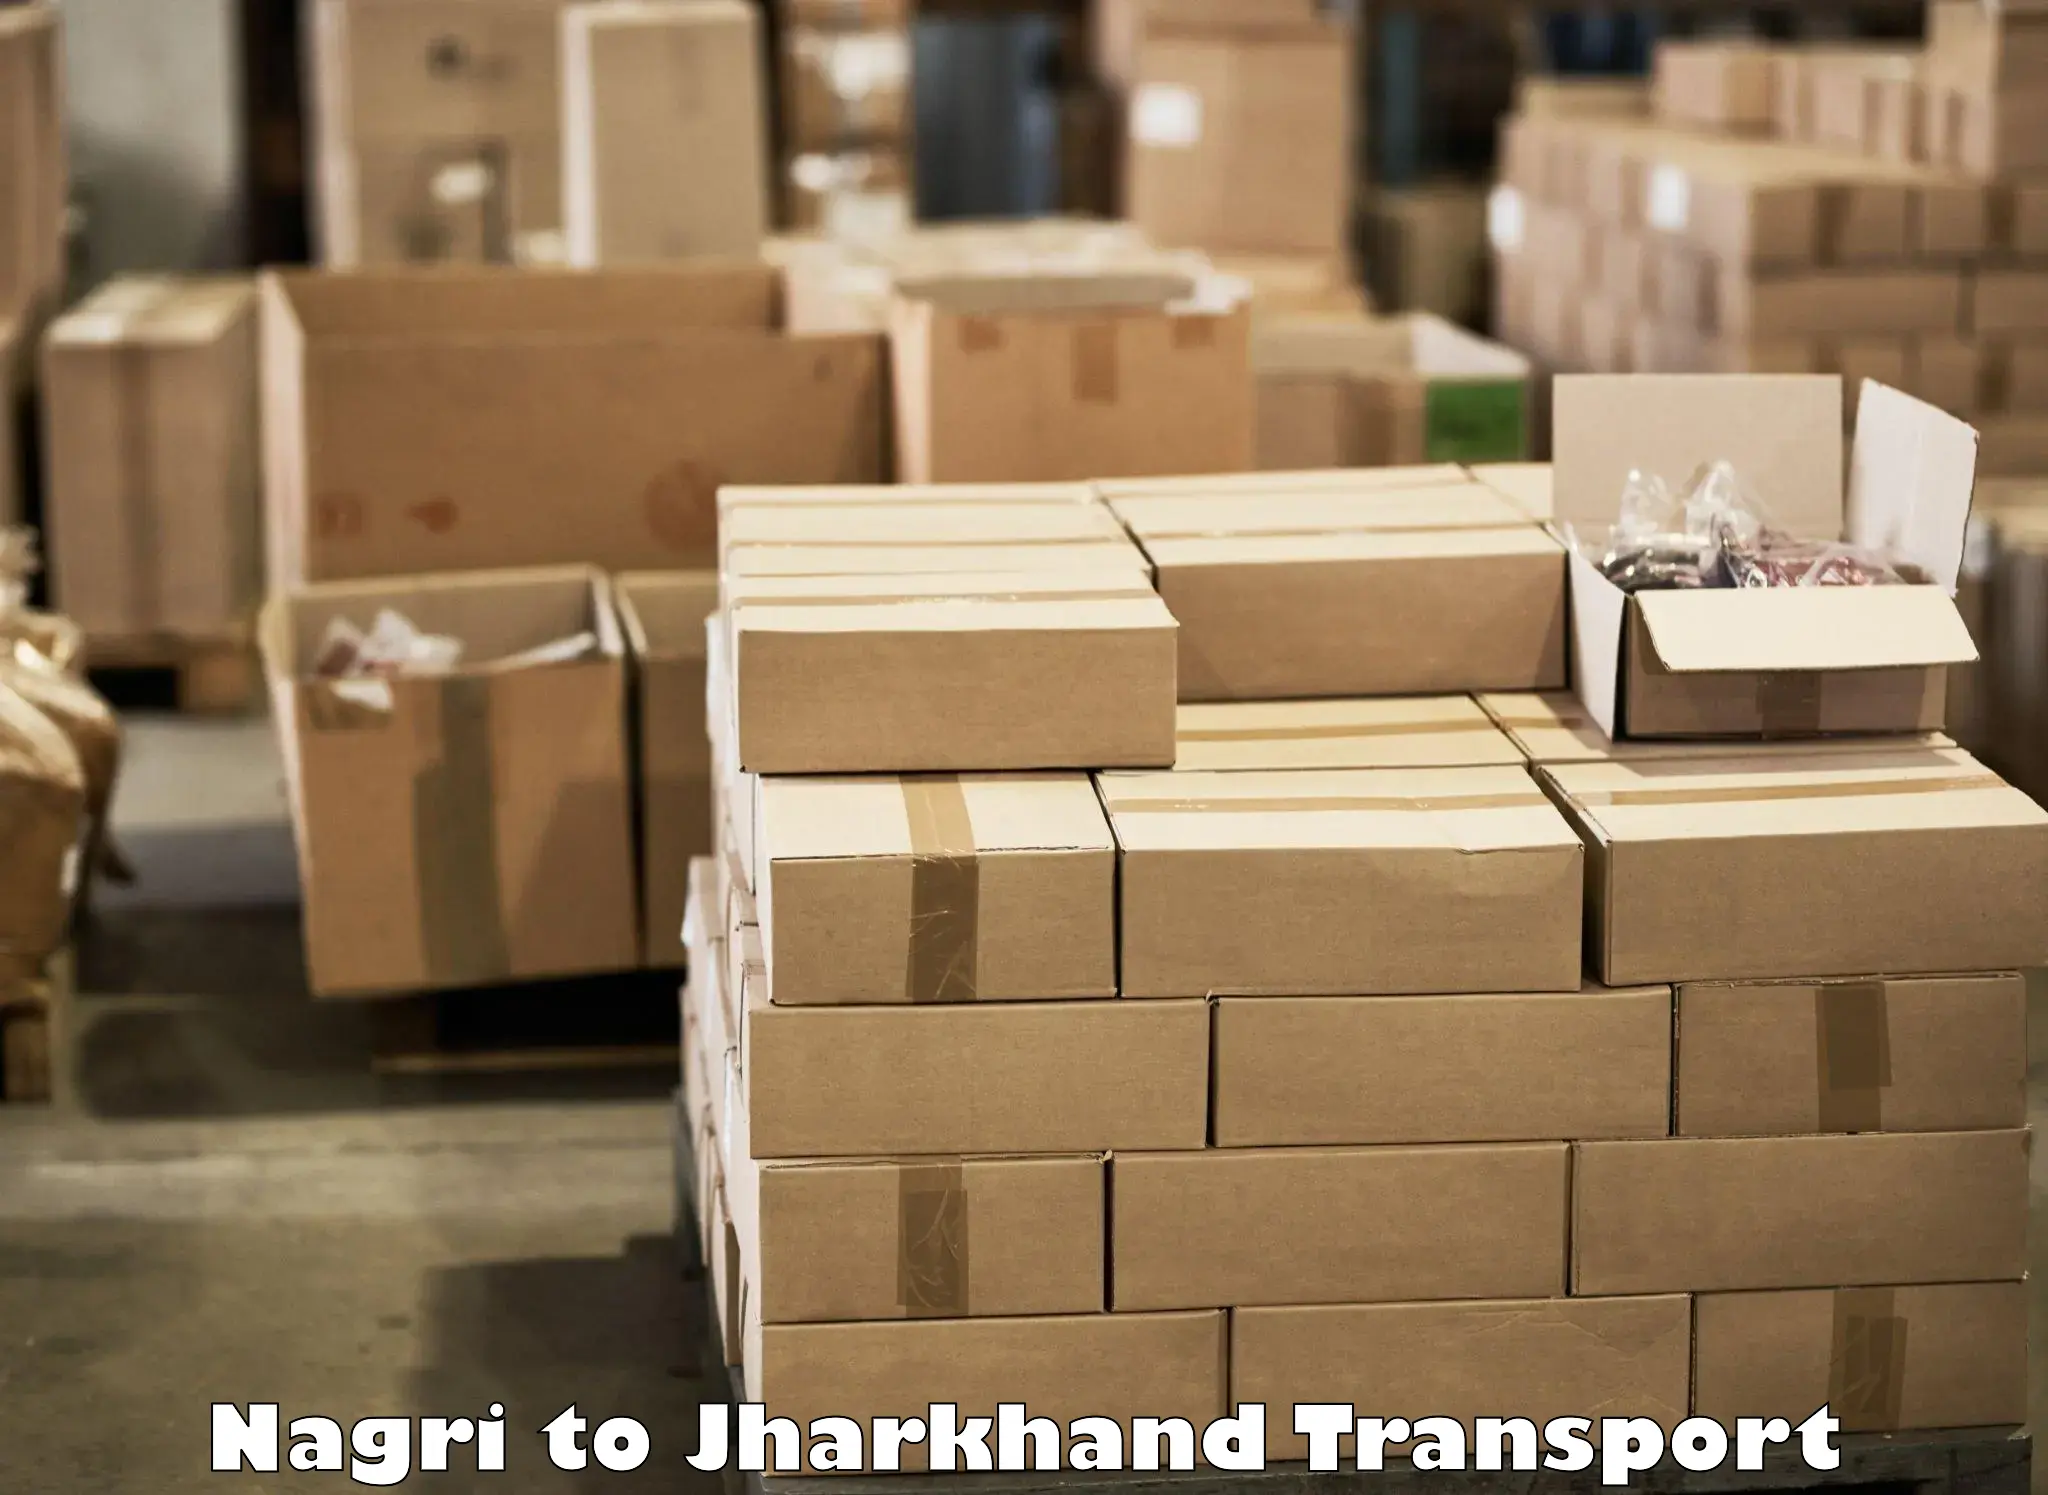 Container transport service Nagri to Dhanbad